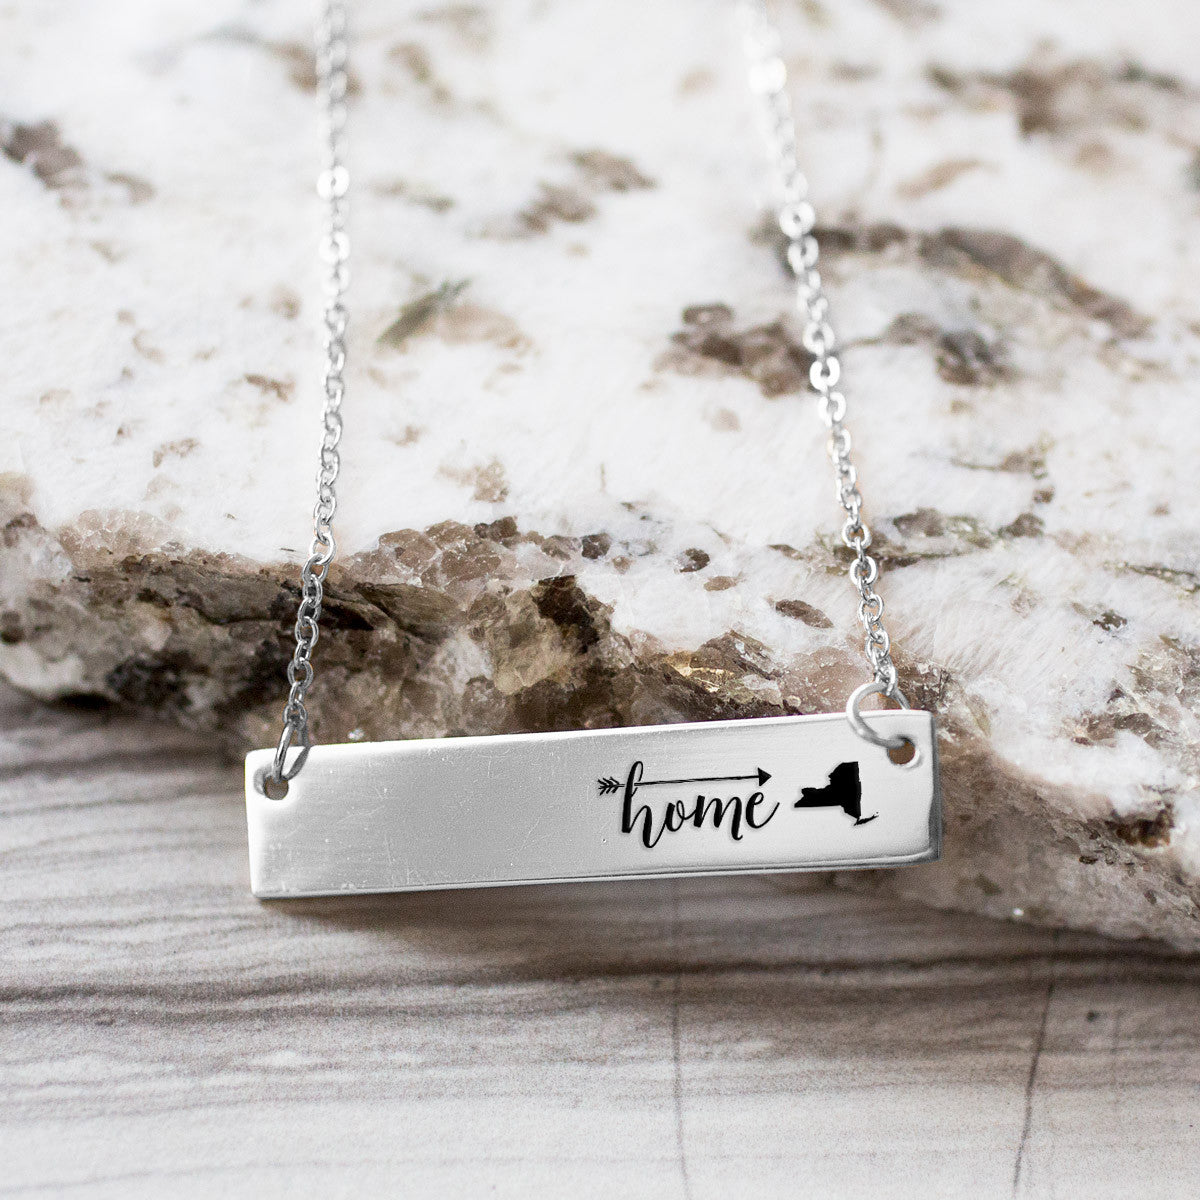 Home is New York Gold / Silver Bar Necklace - pipercleo.com